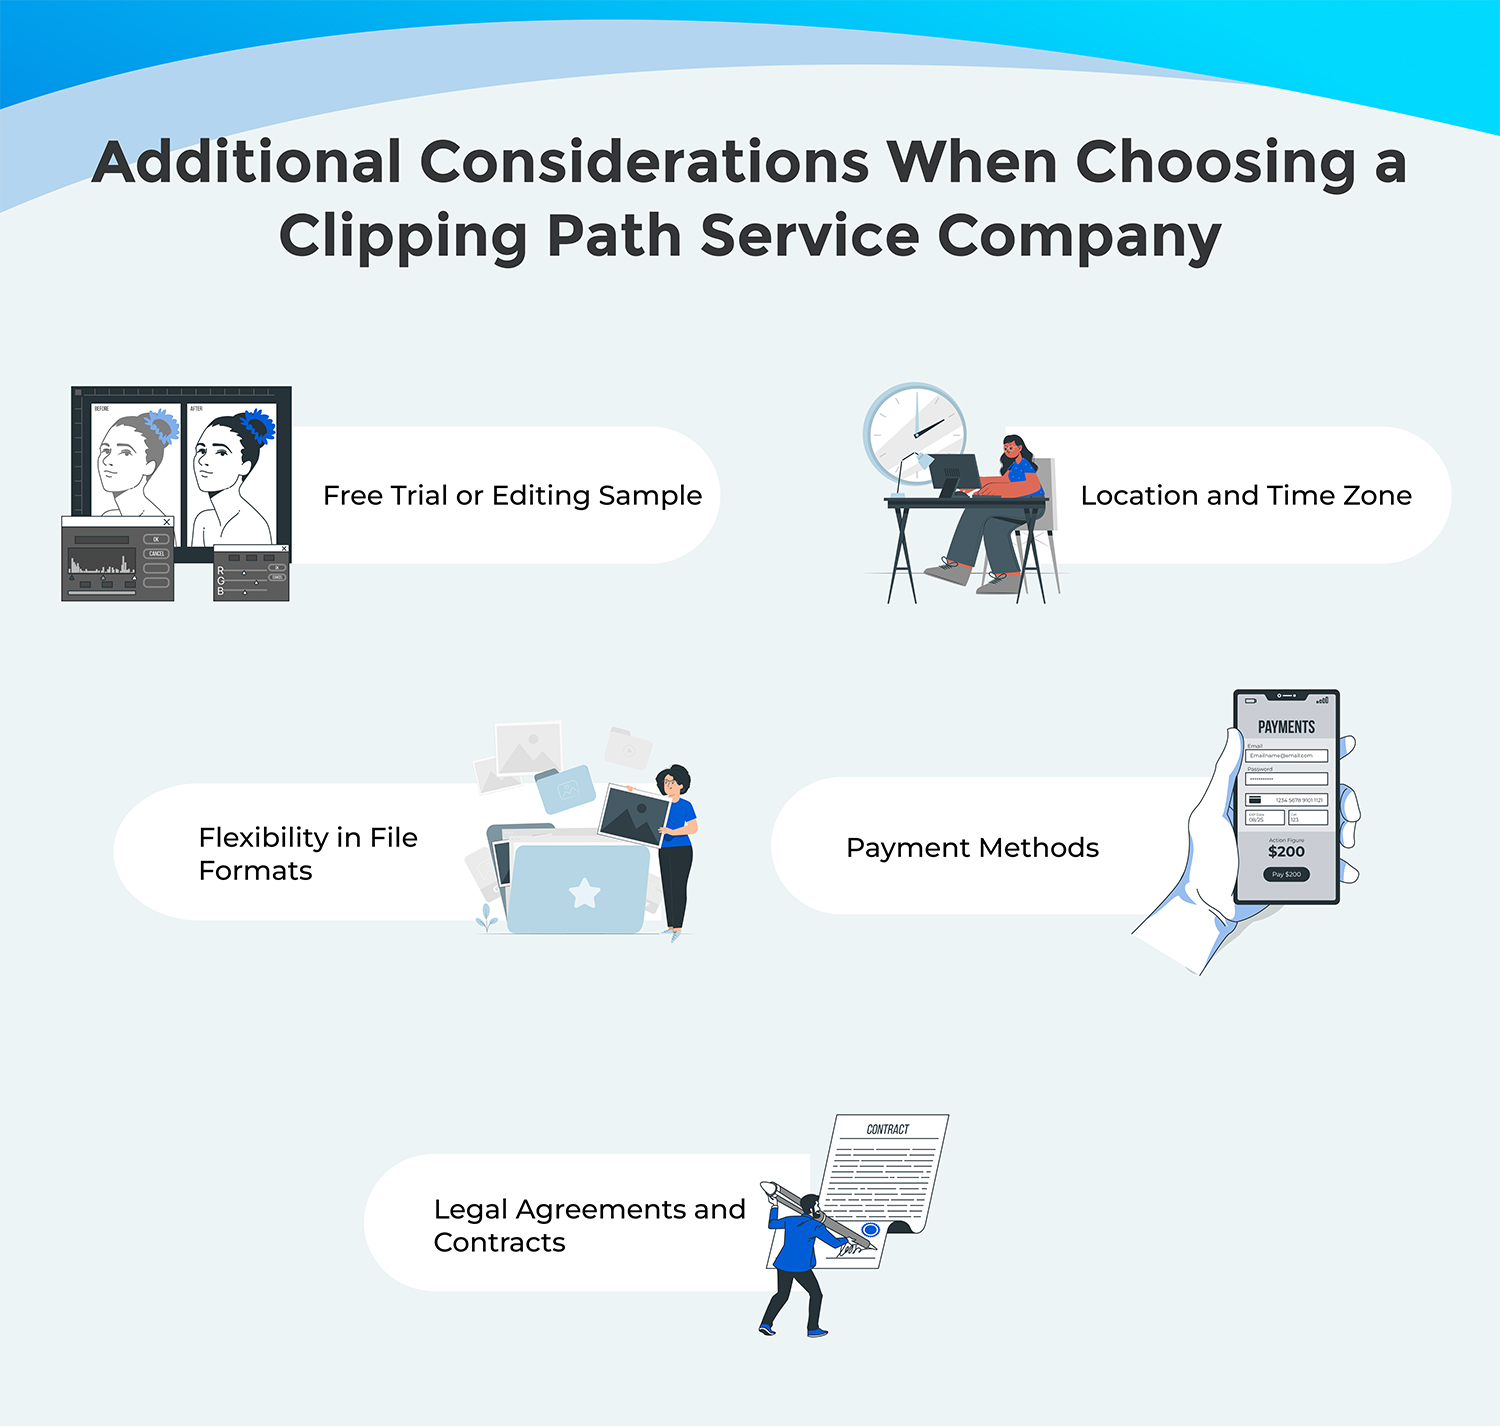 Considerations when choosing a clipping path service company - Infographic